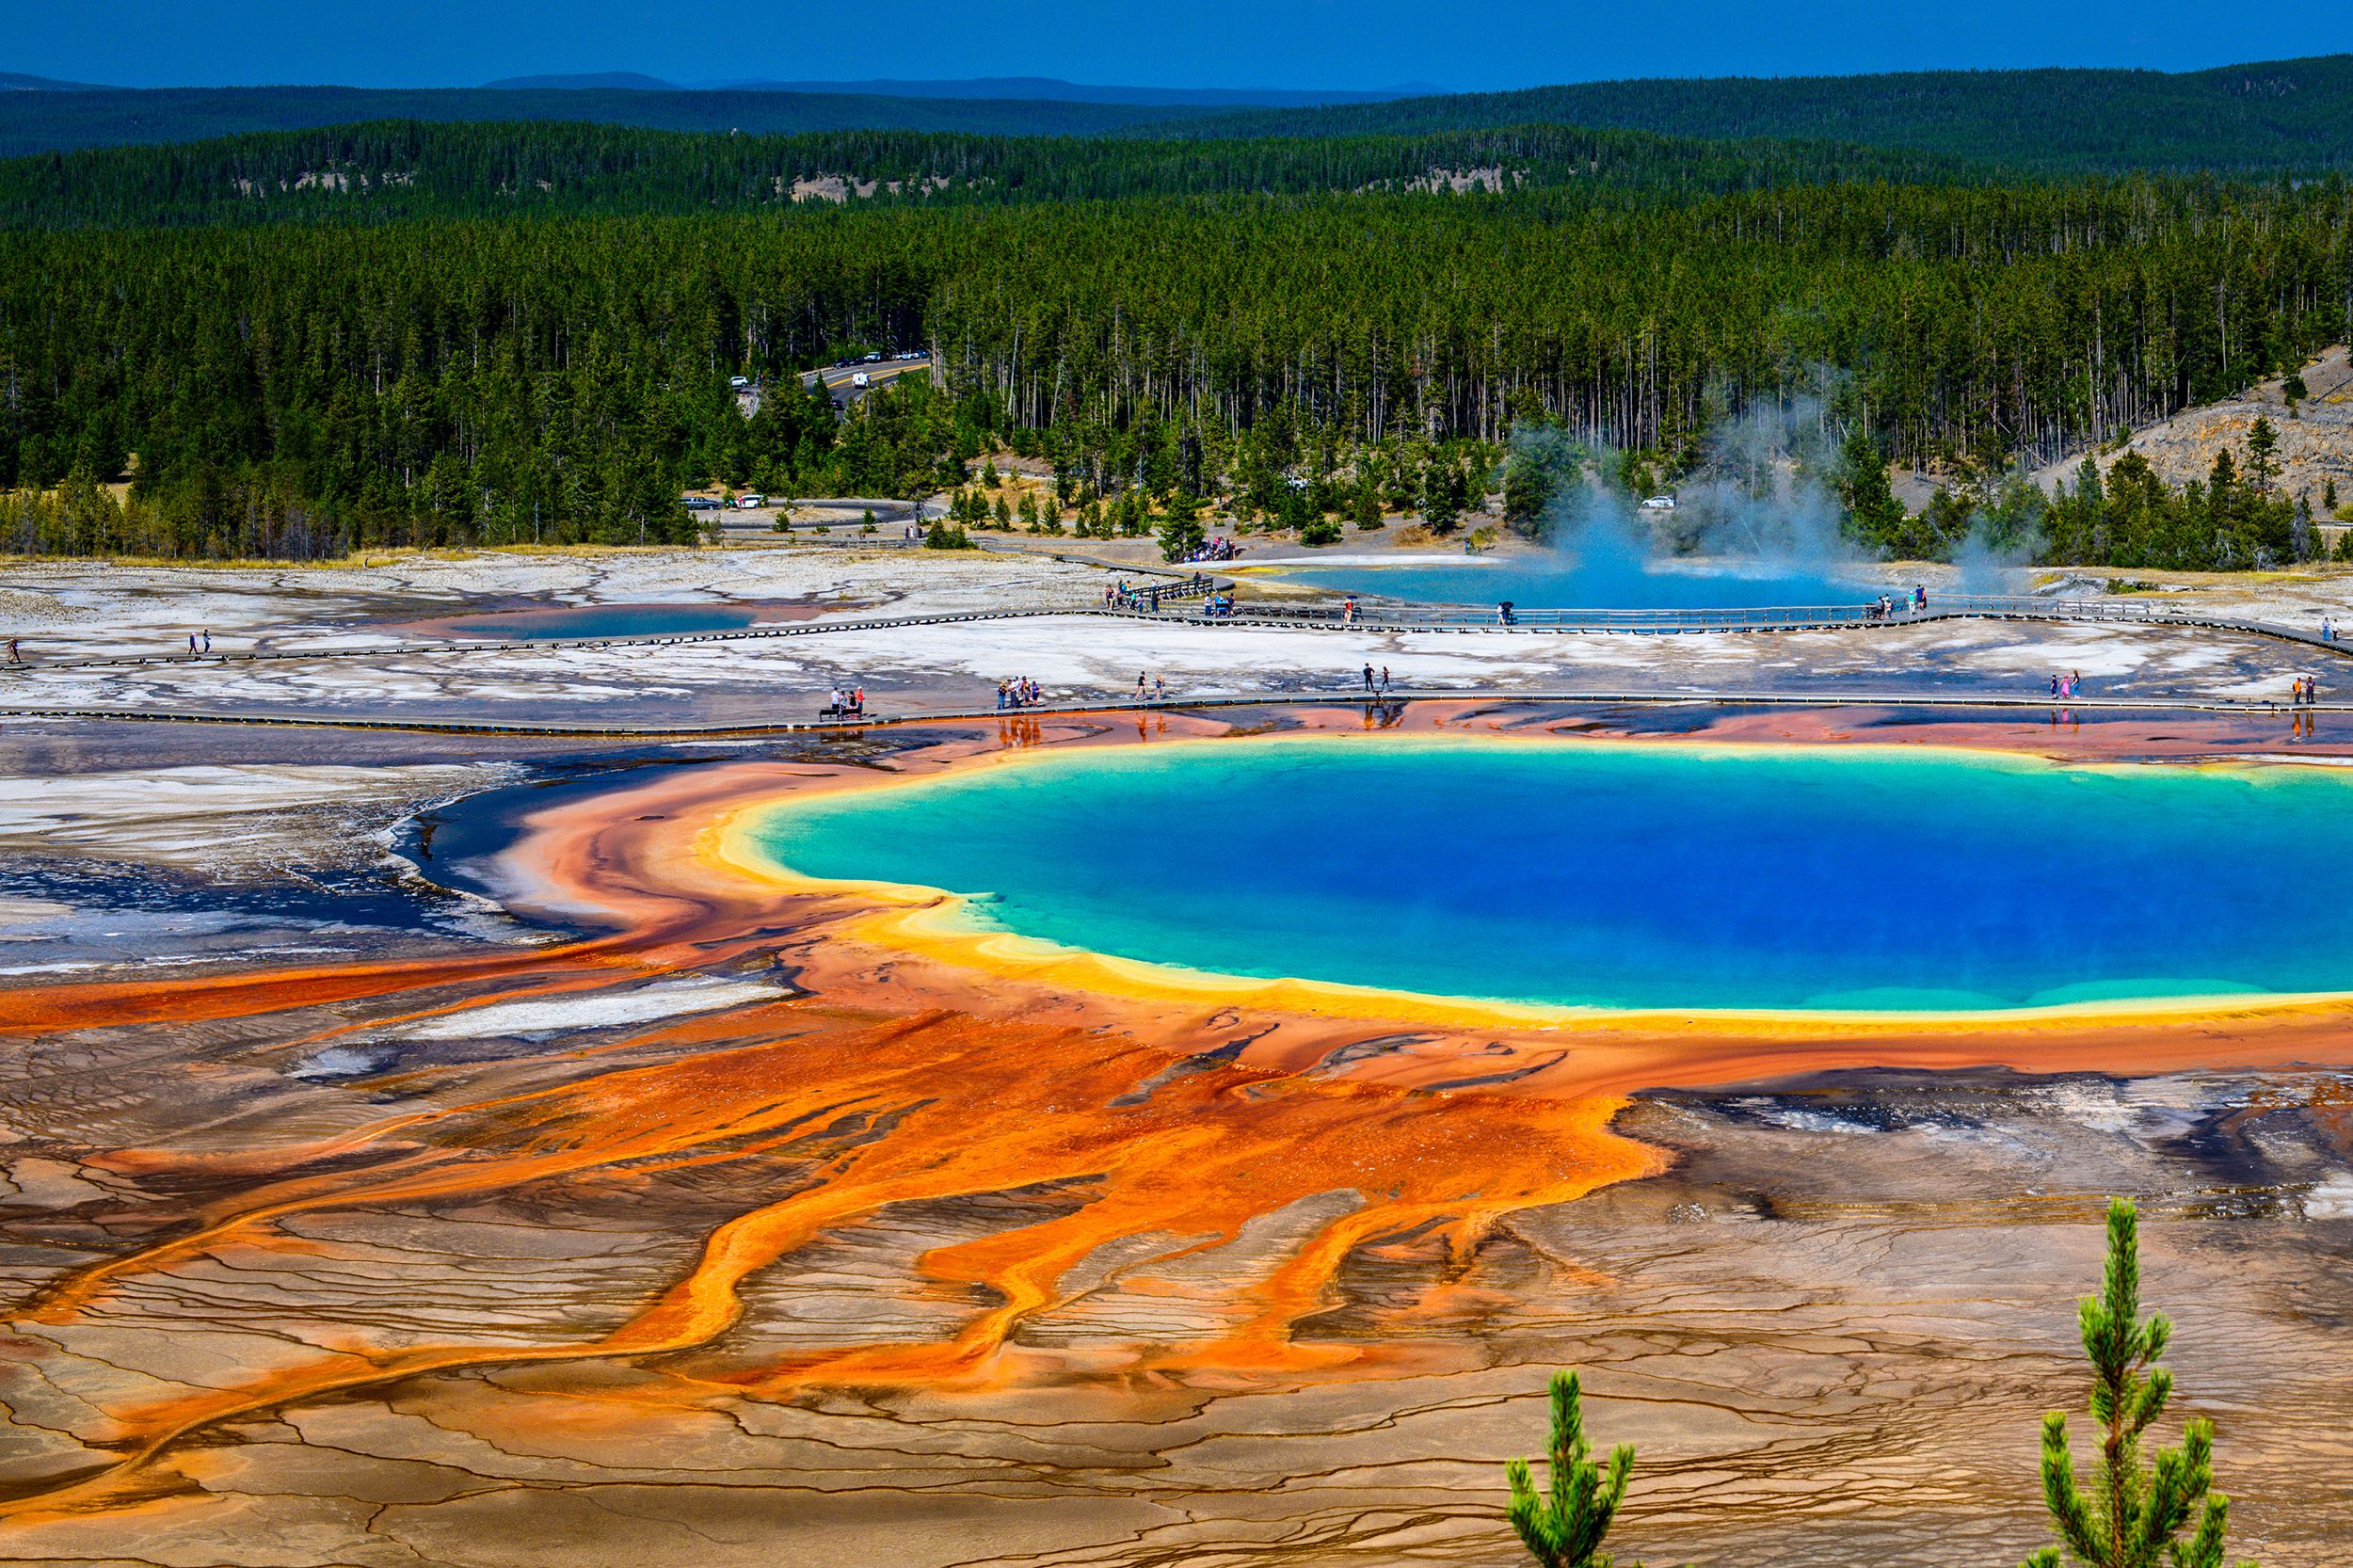 <p>A visit to Yellowstone shoots to the top of many bucket lists despite the $35 vehicle entrance fee, which is good for seven days. Even if you can't find a vacant campsite or cabin within the park, you can lodge nearby and spend all day sighing at the bounteous natural wonders.</p><p><b>Related:</b> <a href="https://blog.cheapism.com/yellowstone-trivia/">25 Things You Didn't Know About America's Oldest National Park</a></p>